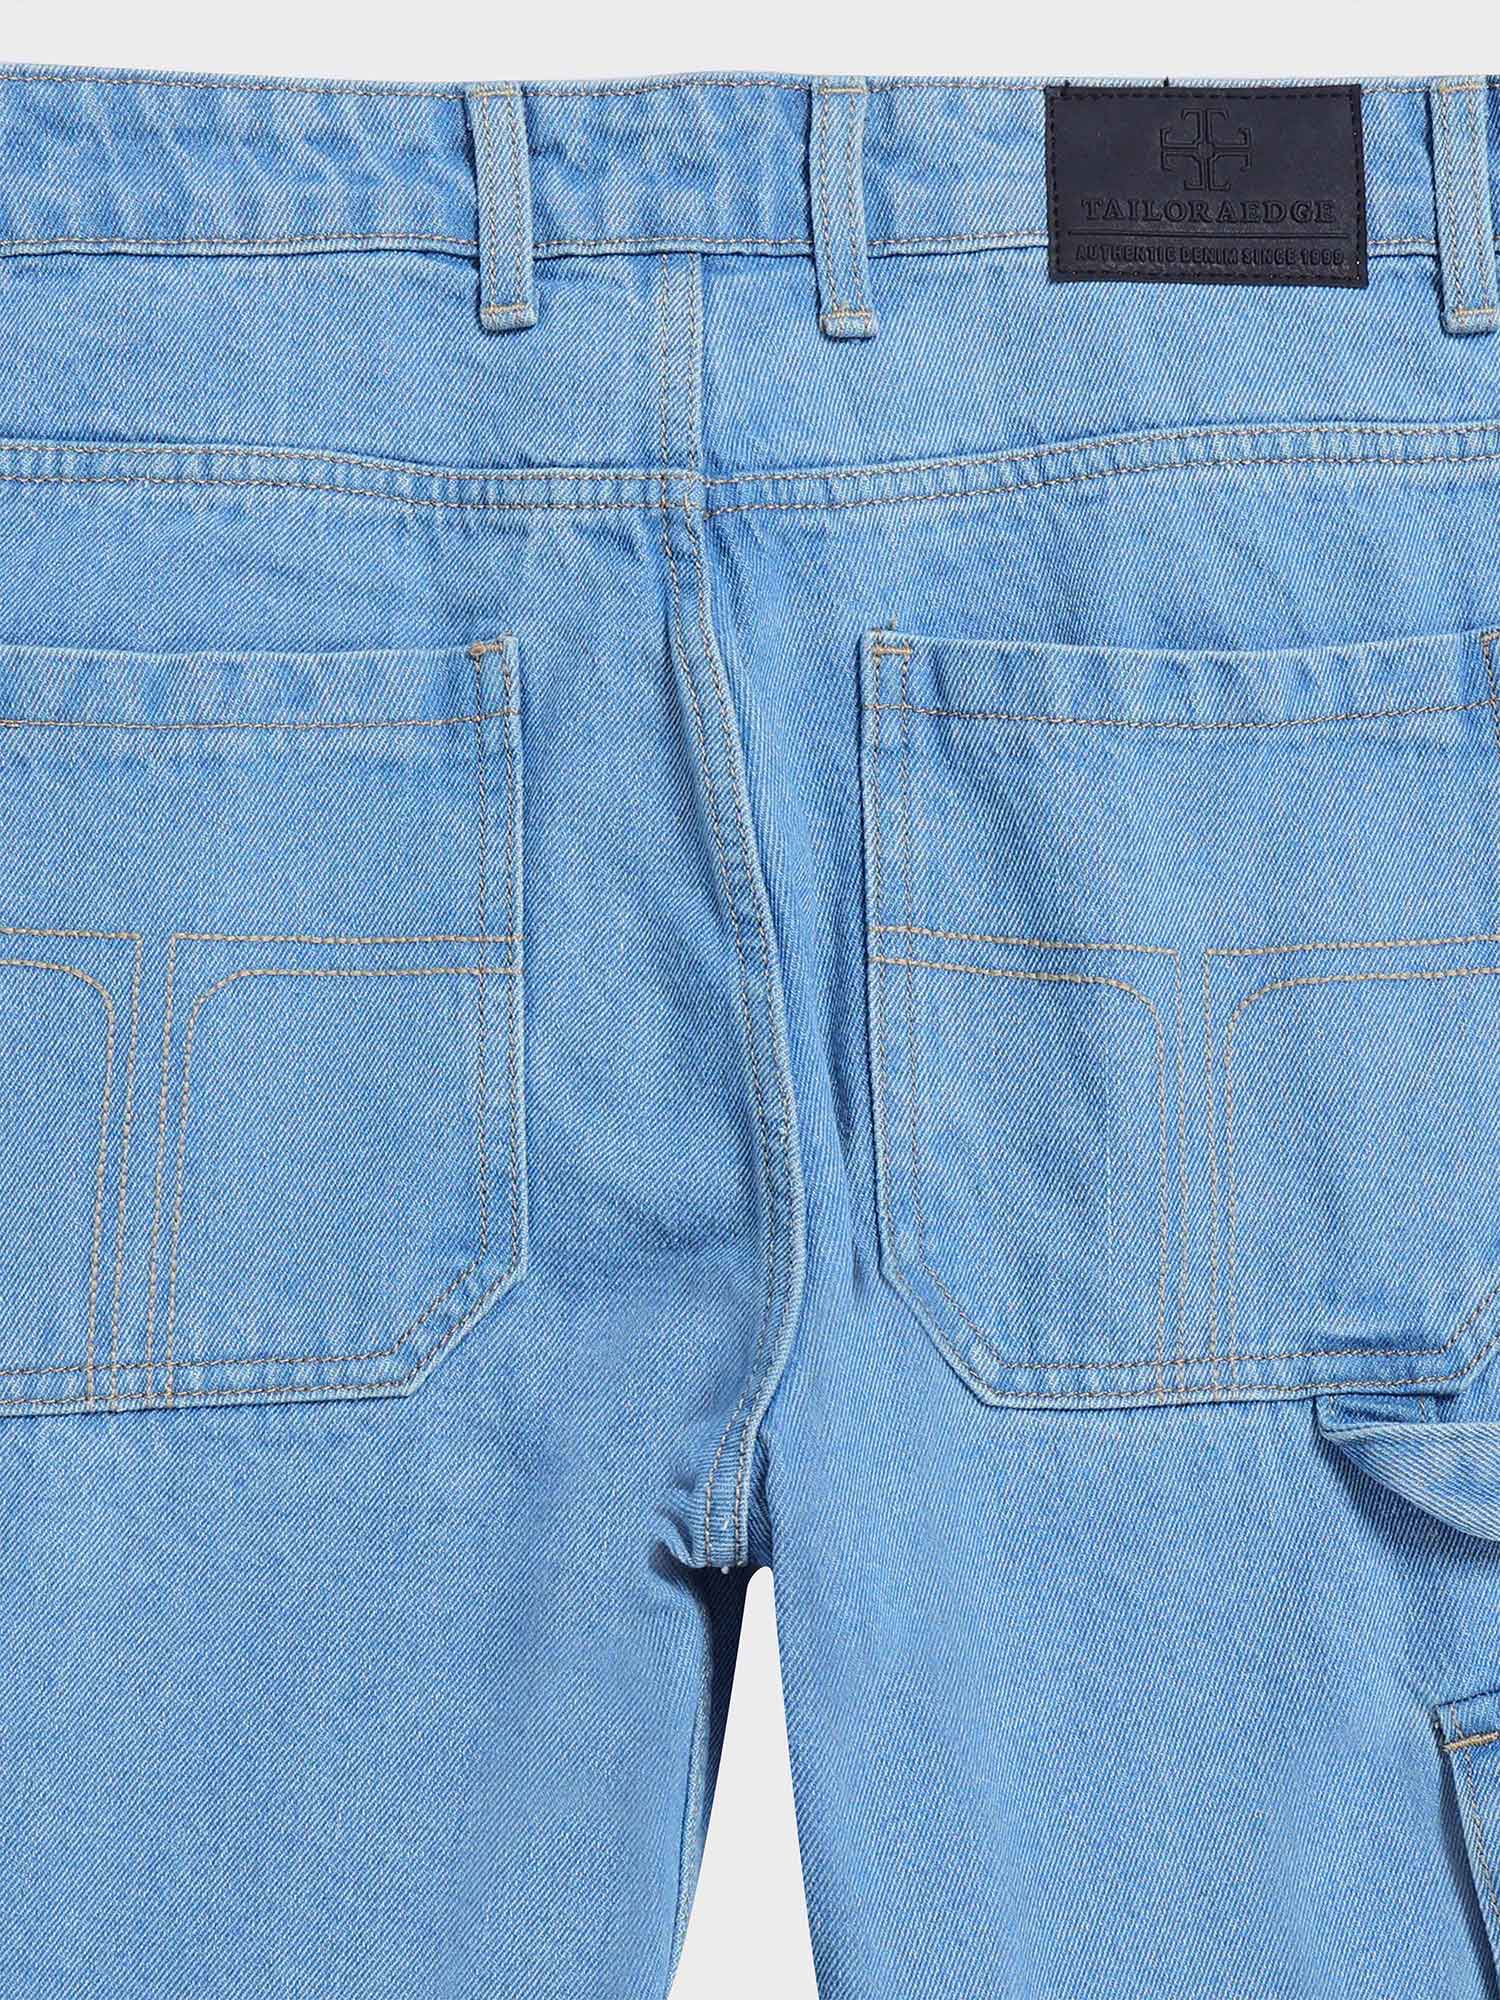 Classic Relaxed Mid Blue Denim Cargo